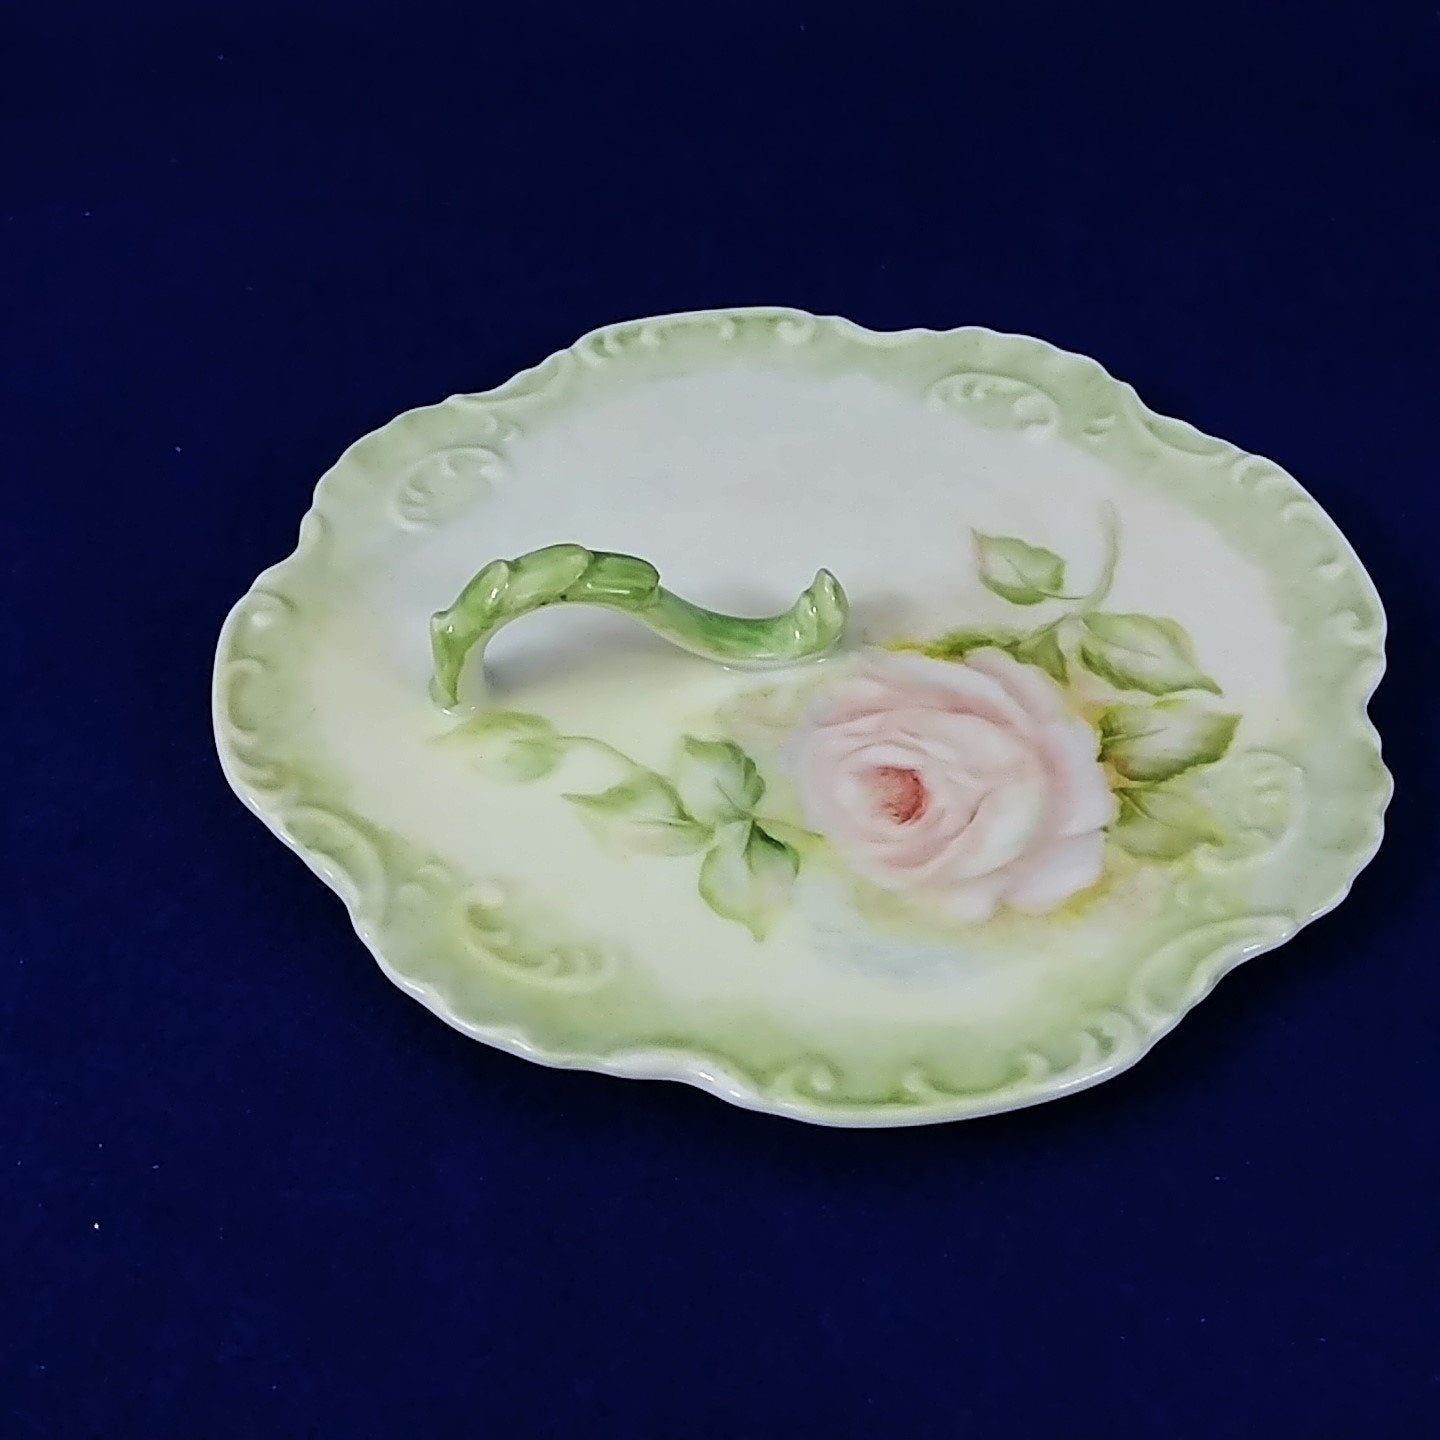 Dish with Finger Loop Lemon Server Bonbon Dish Hand Painted Floral Signed Dated